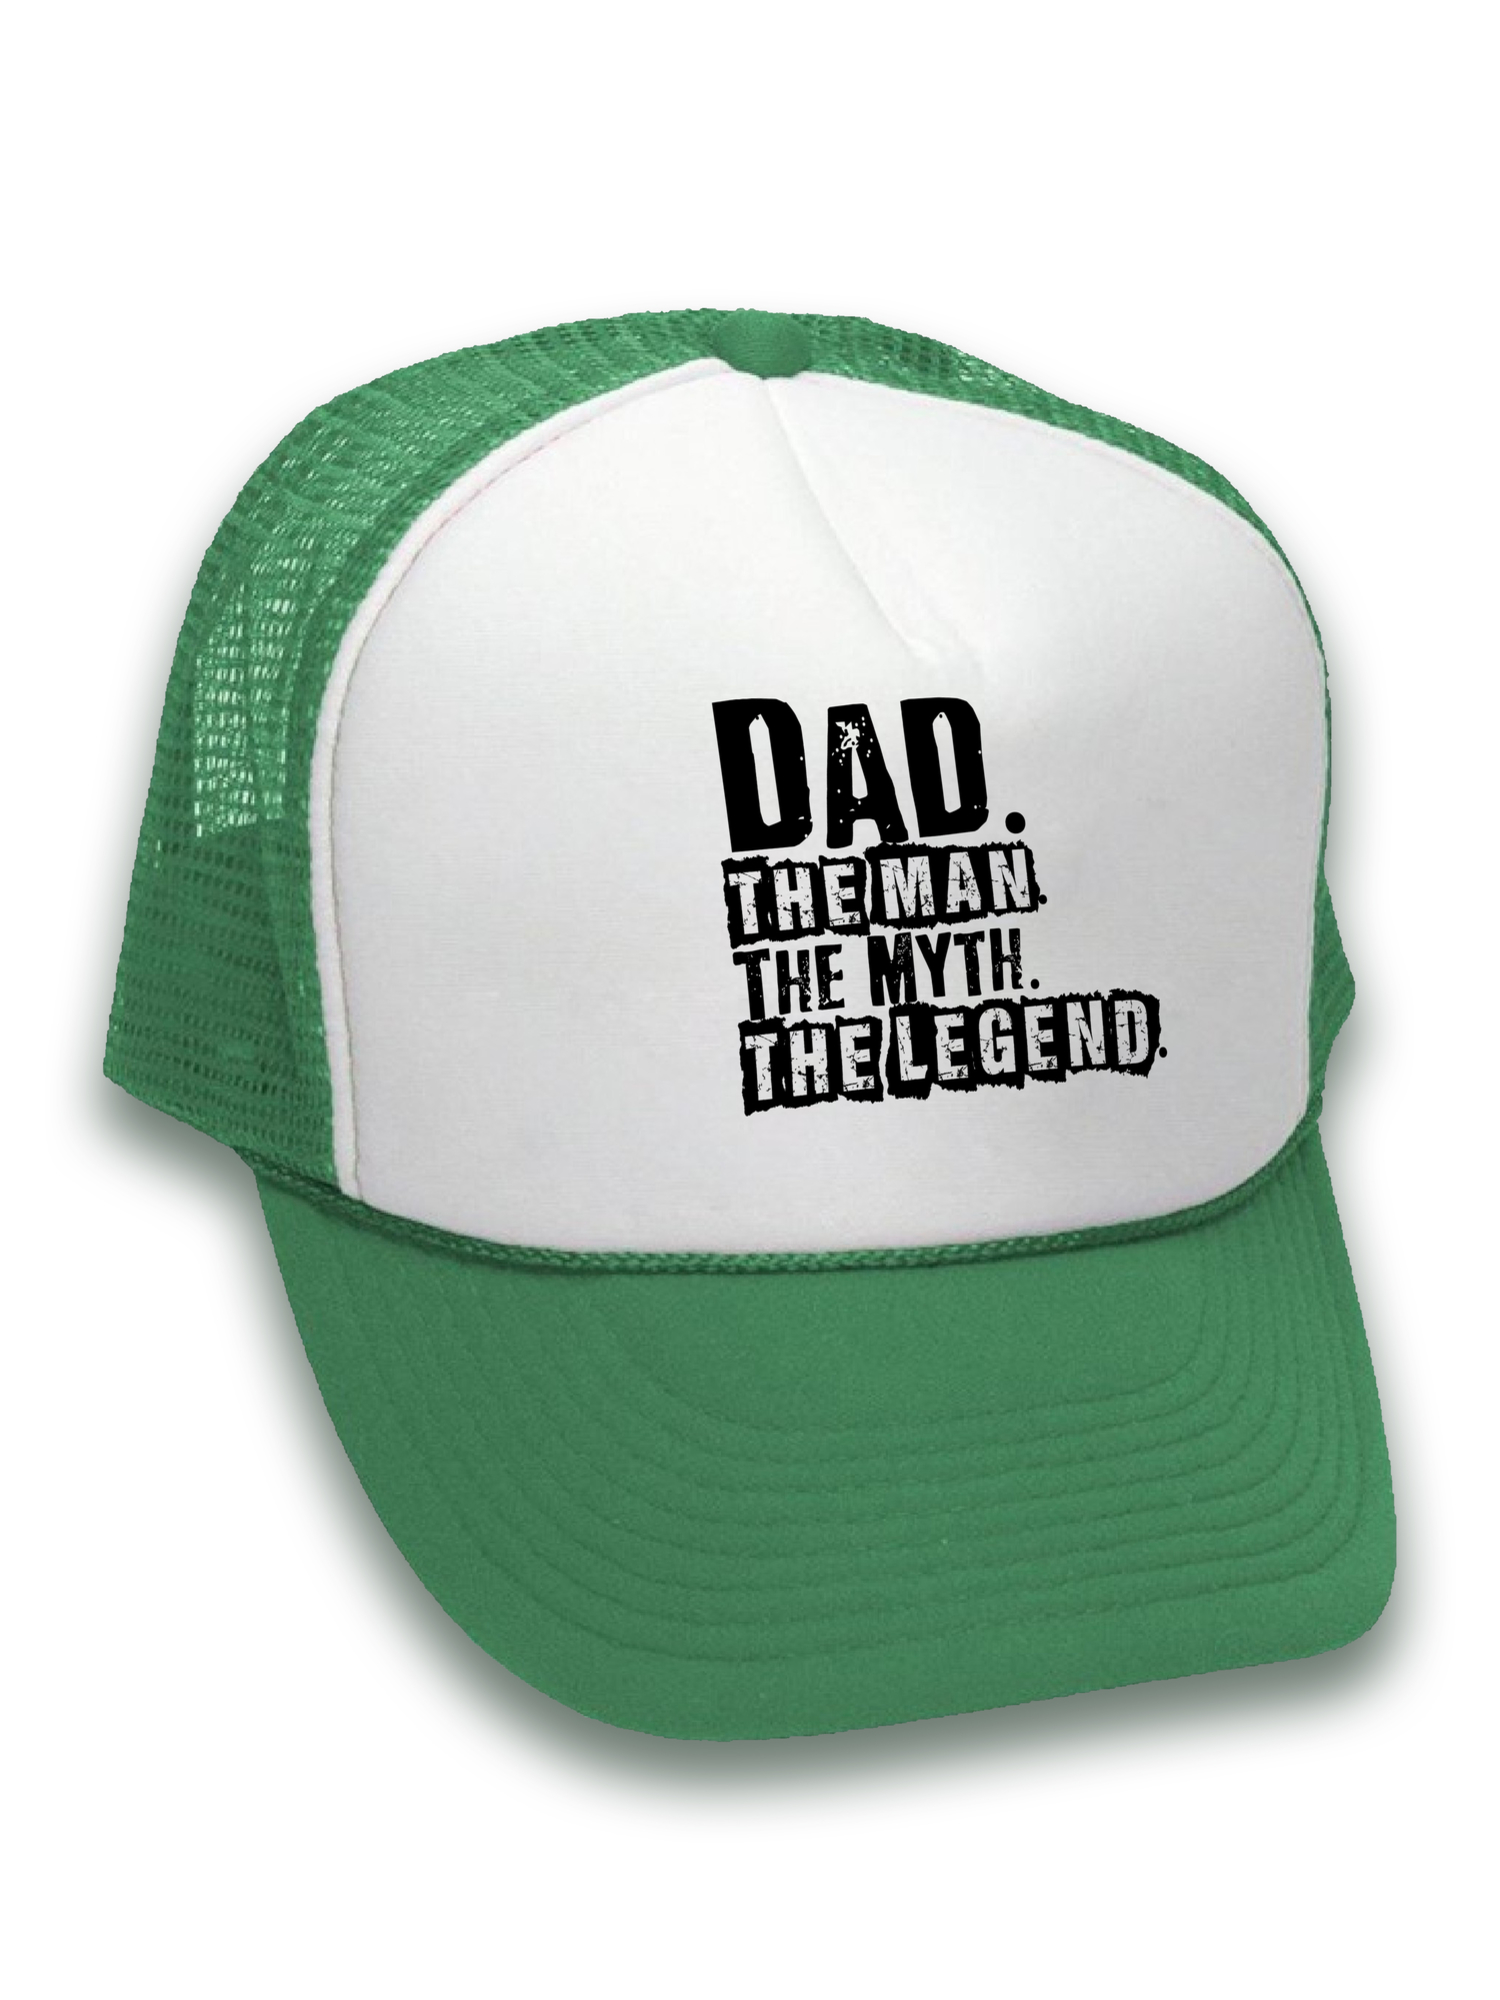 Awkward Styles Gifts for Dad Dad The Man The Myth The Legend Trucker Hat Legendary Dad Hat Funny Dad Hats with Sayings Dad The Man Snapback Hat Dad Accessories Funny Dad Gifts for Father's Day - image 2 of 6